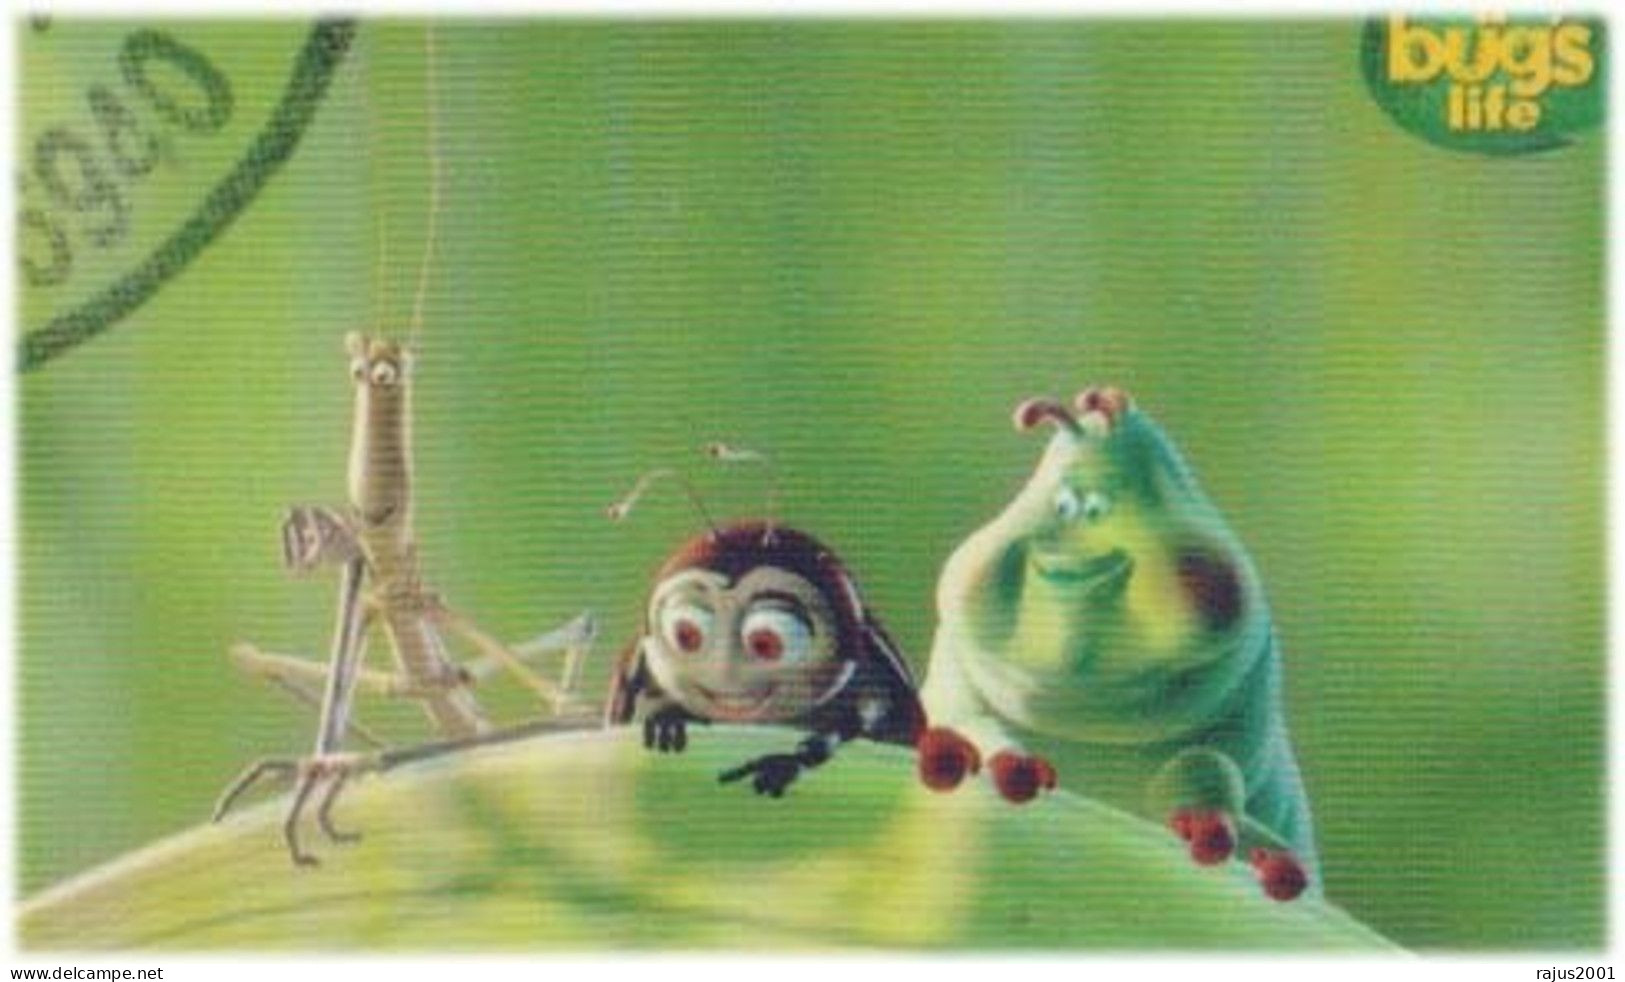 Disney Pixar, Bug, Bugs Life, Insects, Insect, Queen Ant, Ants, Beetles, Butterfly,  Cartoon, Animal, Souvenir Sheet FDC - Farfalle